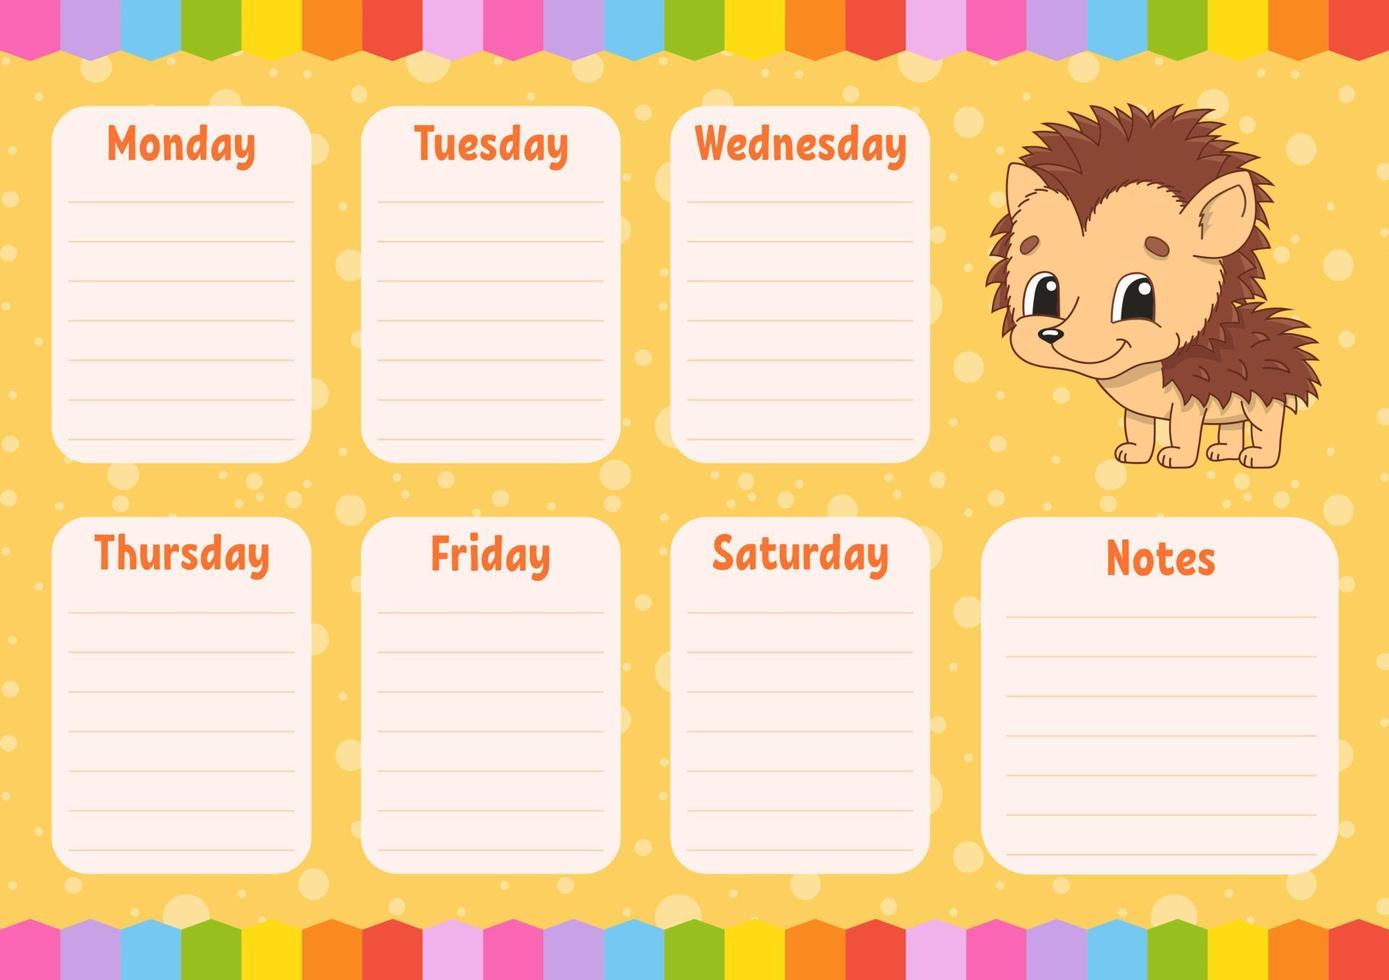 School schedule. Timetable for schoolboys. Empty template. Weekly planer with notes. Isolated color vector illustration. Funny character. Cartoon style.